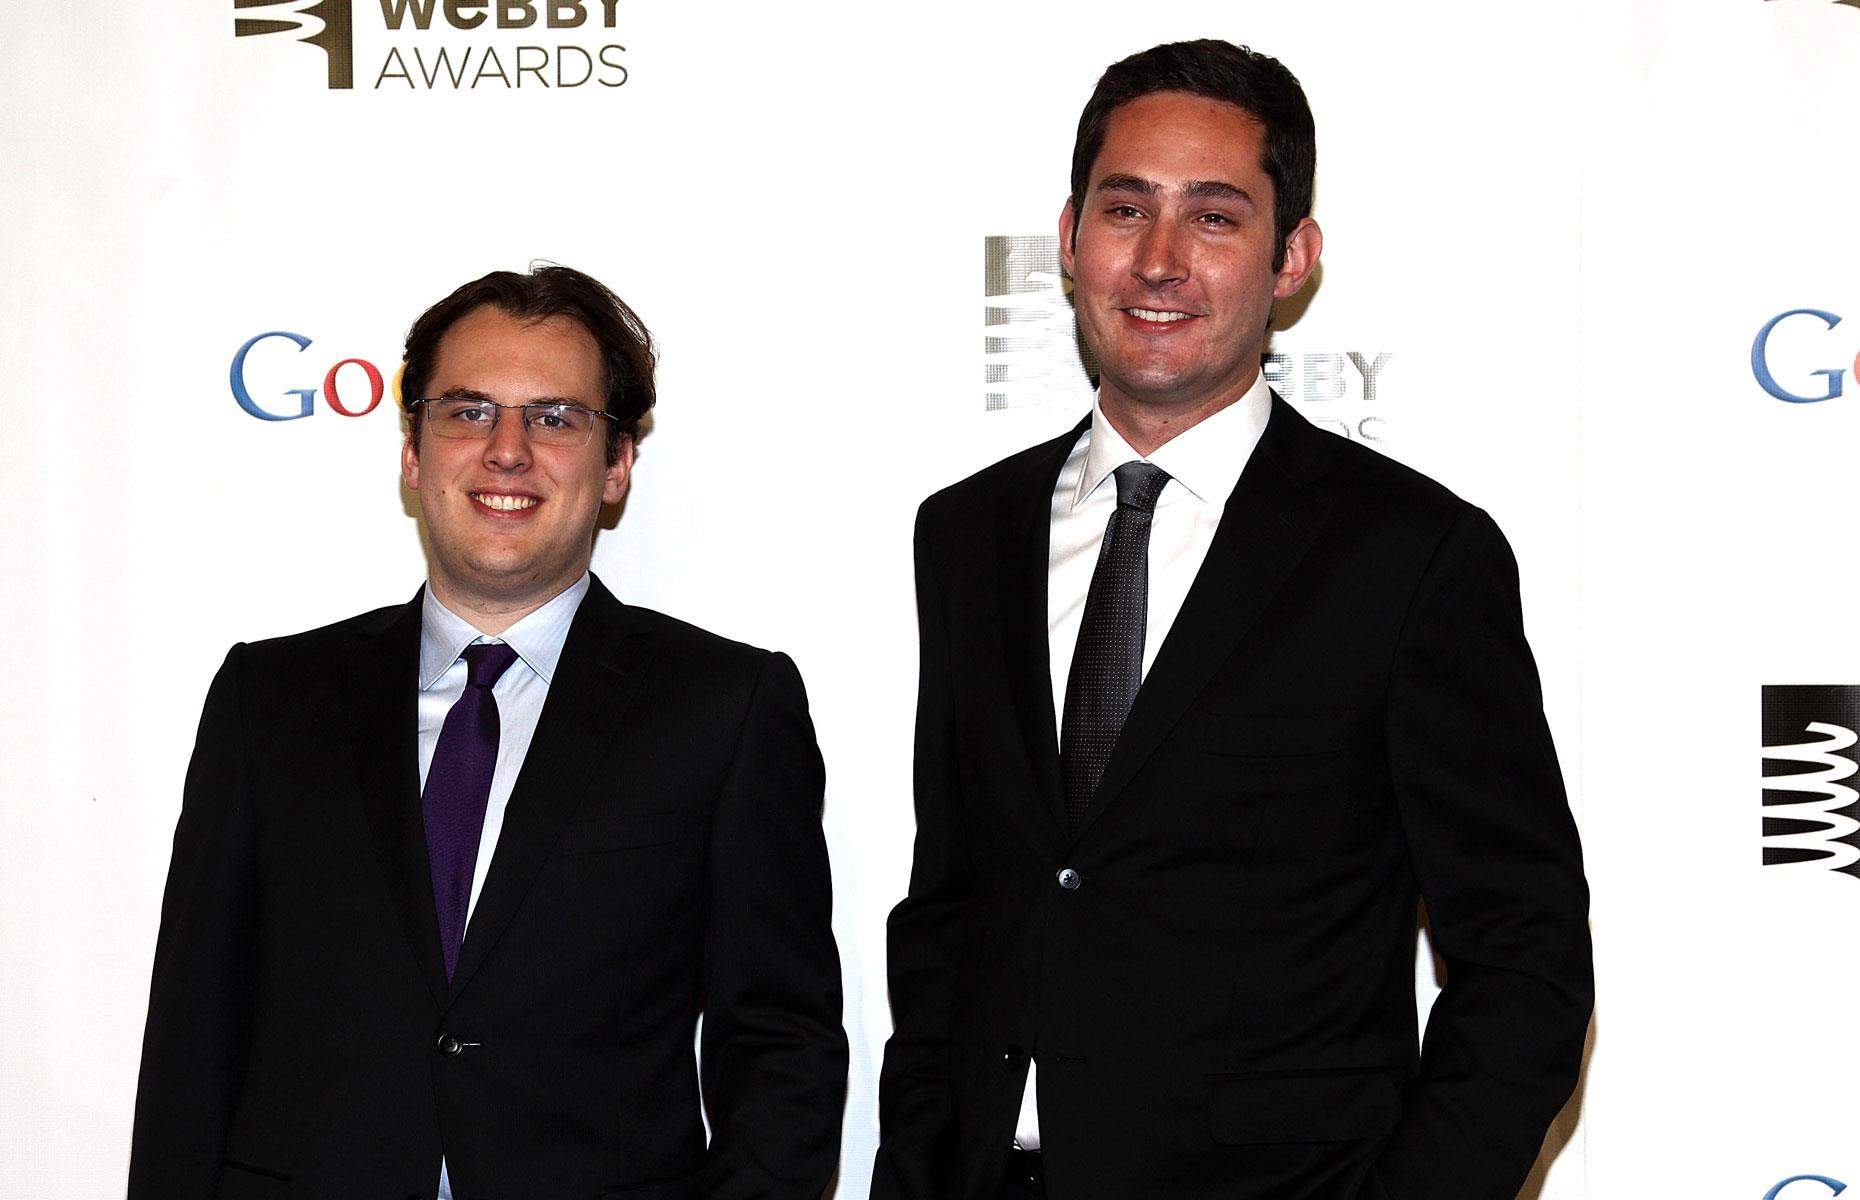 Kevin Systrom and Mike Krieger's Instagram